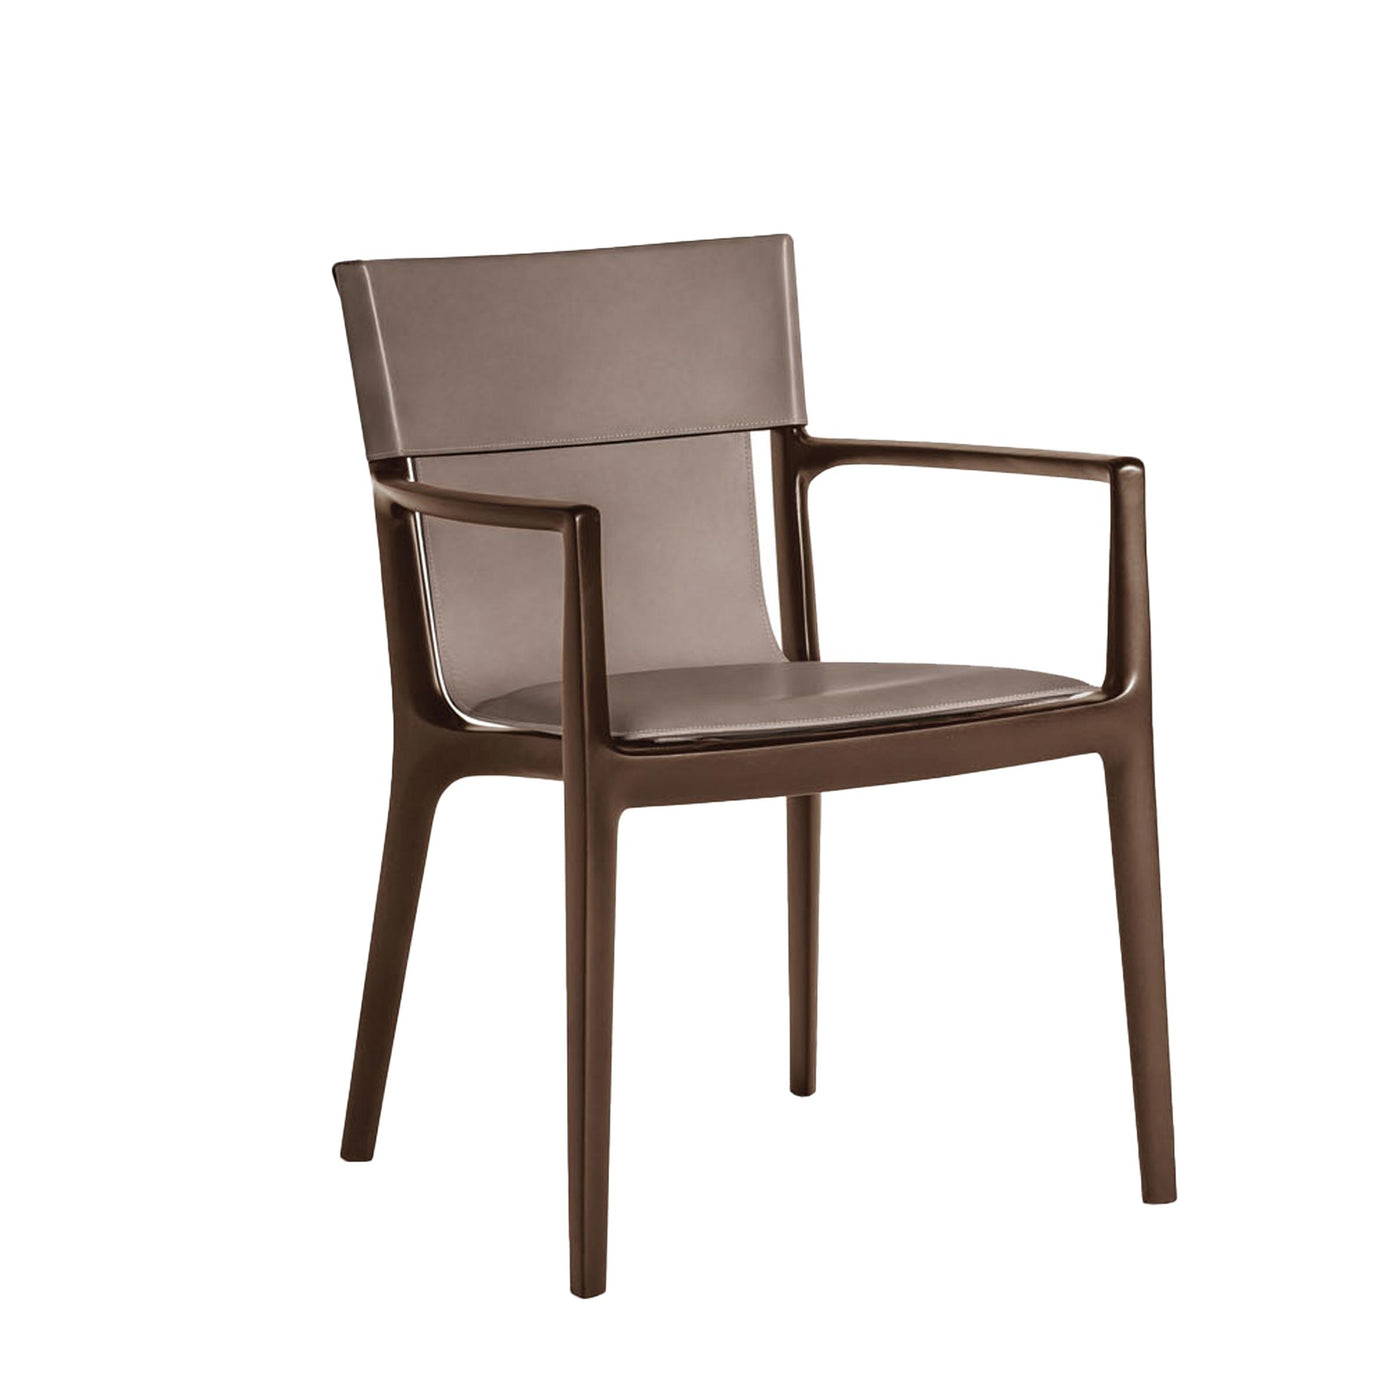 Leather Dining Chair ISADORA by Roberto Lazzeroni for Poltrona Frau 016